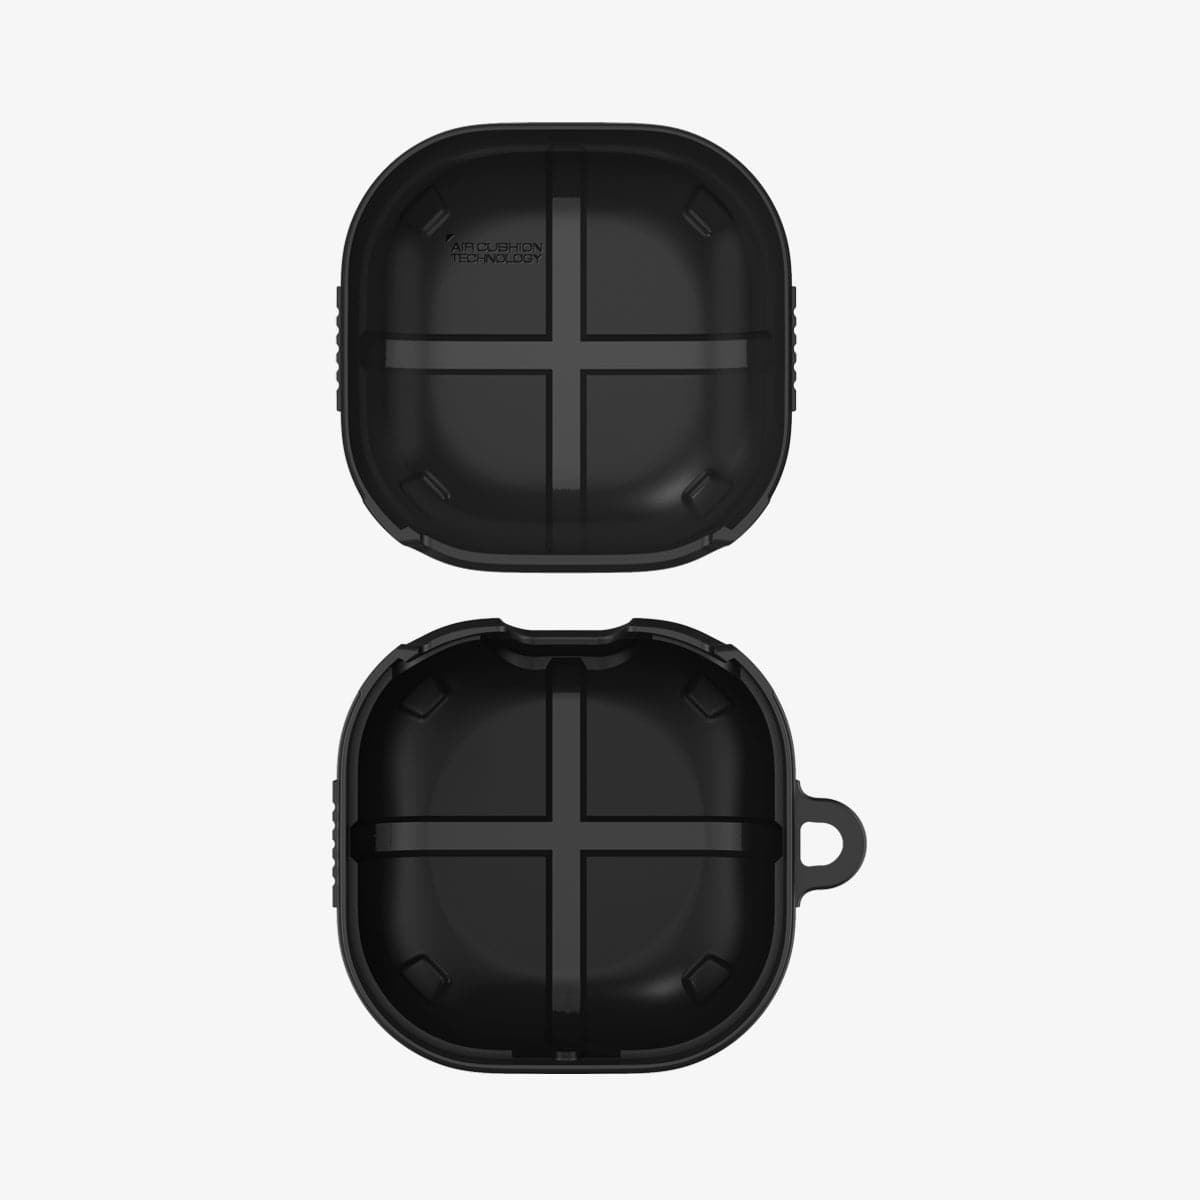 ASD01276 - Galaxy Buds 2 Pro / 2 / Pro / Live Case Rugged Armor in matte black showing the inside of case